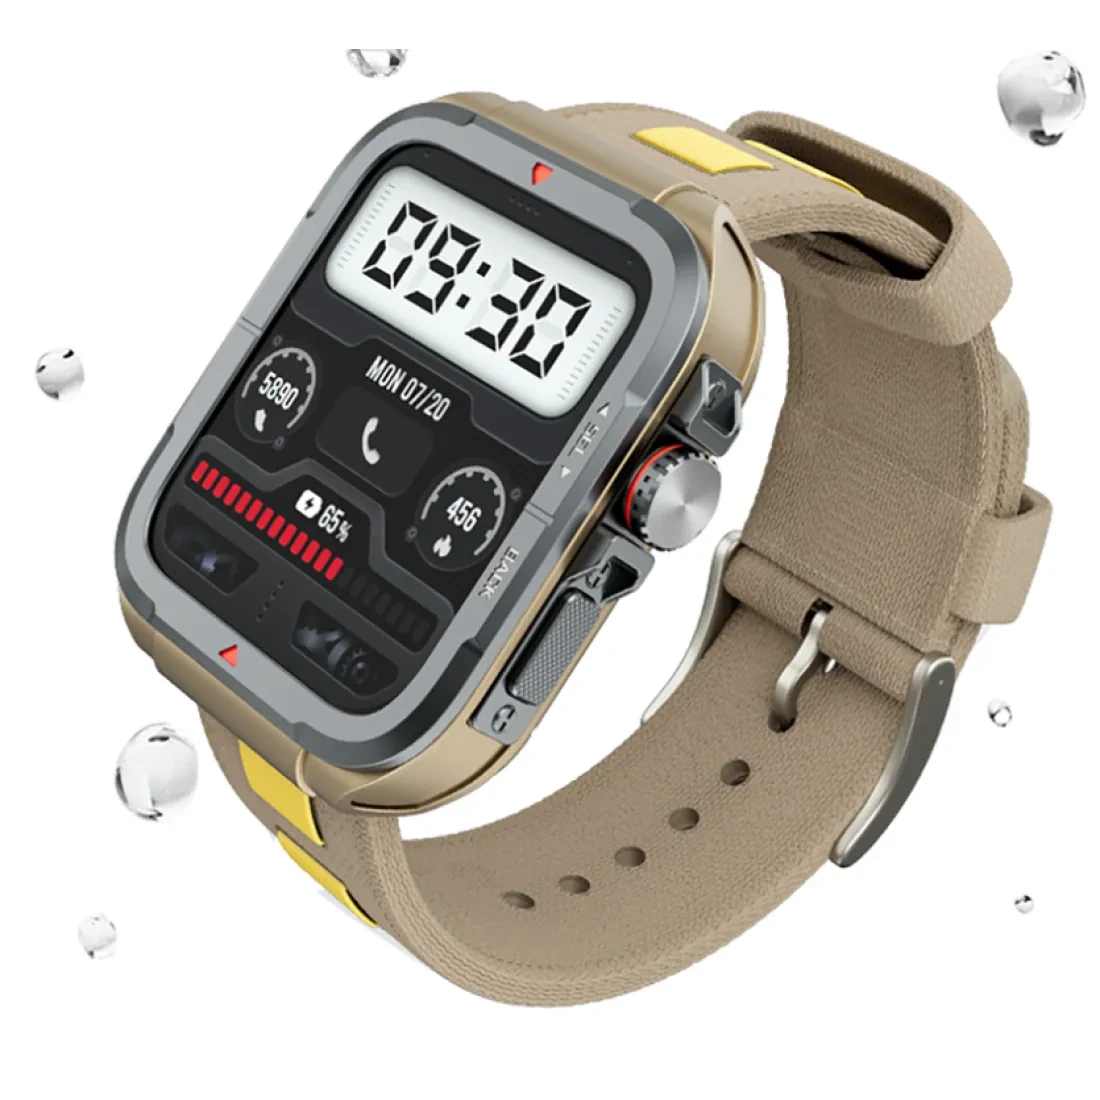 Udfine Watch GT Smartwatch – Yellow Color